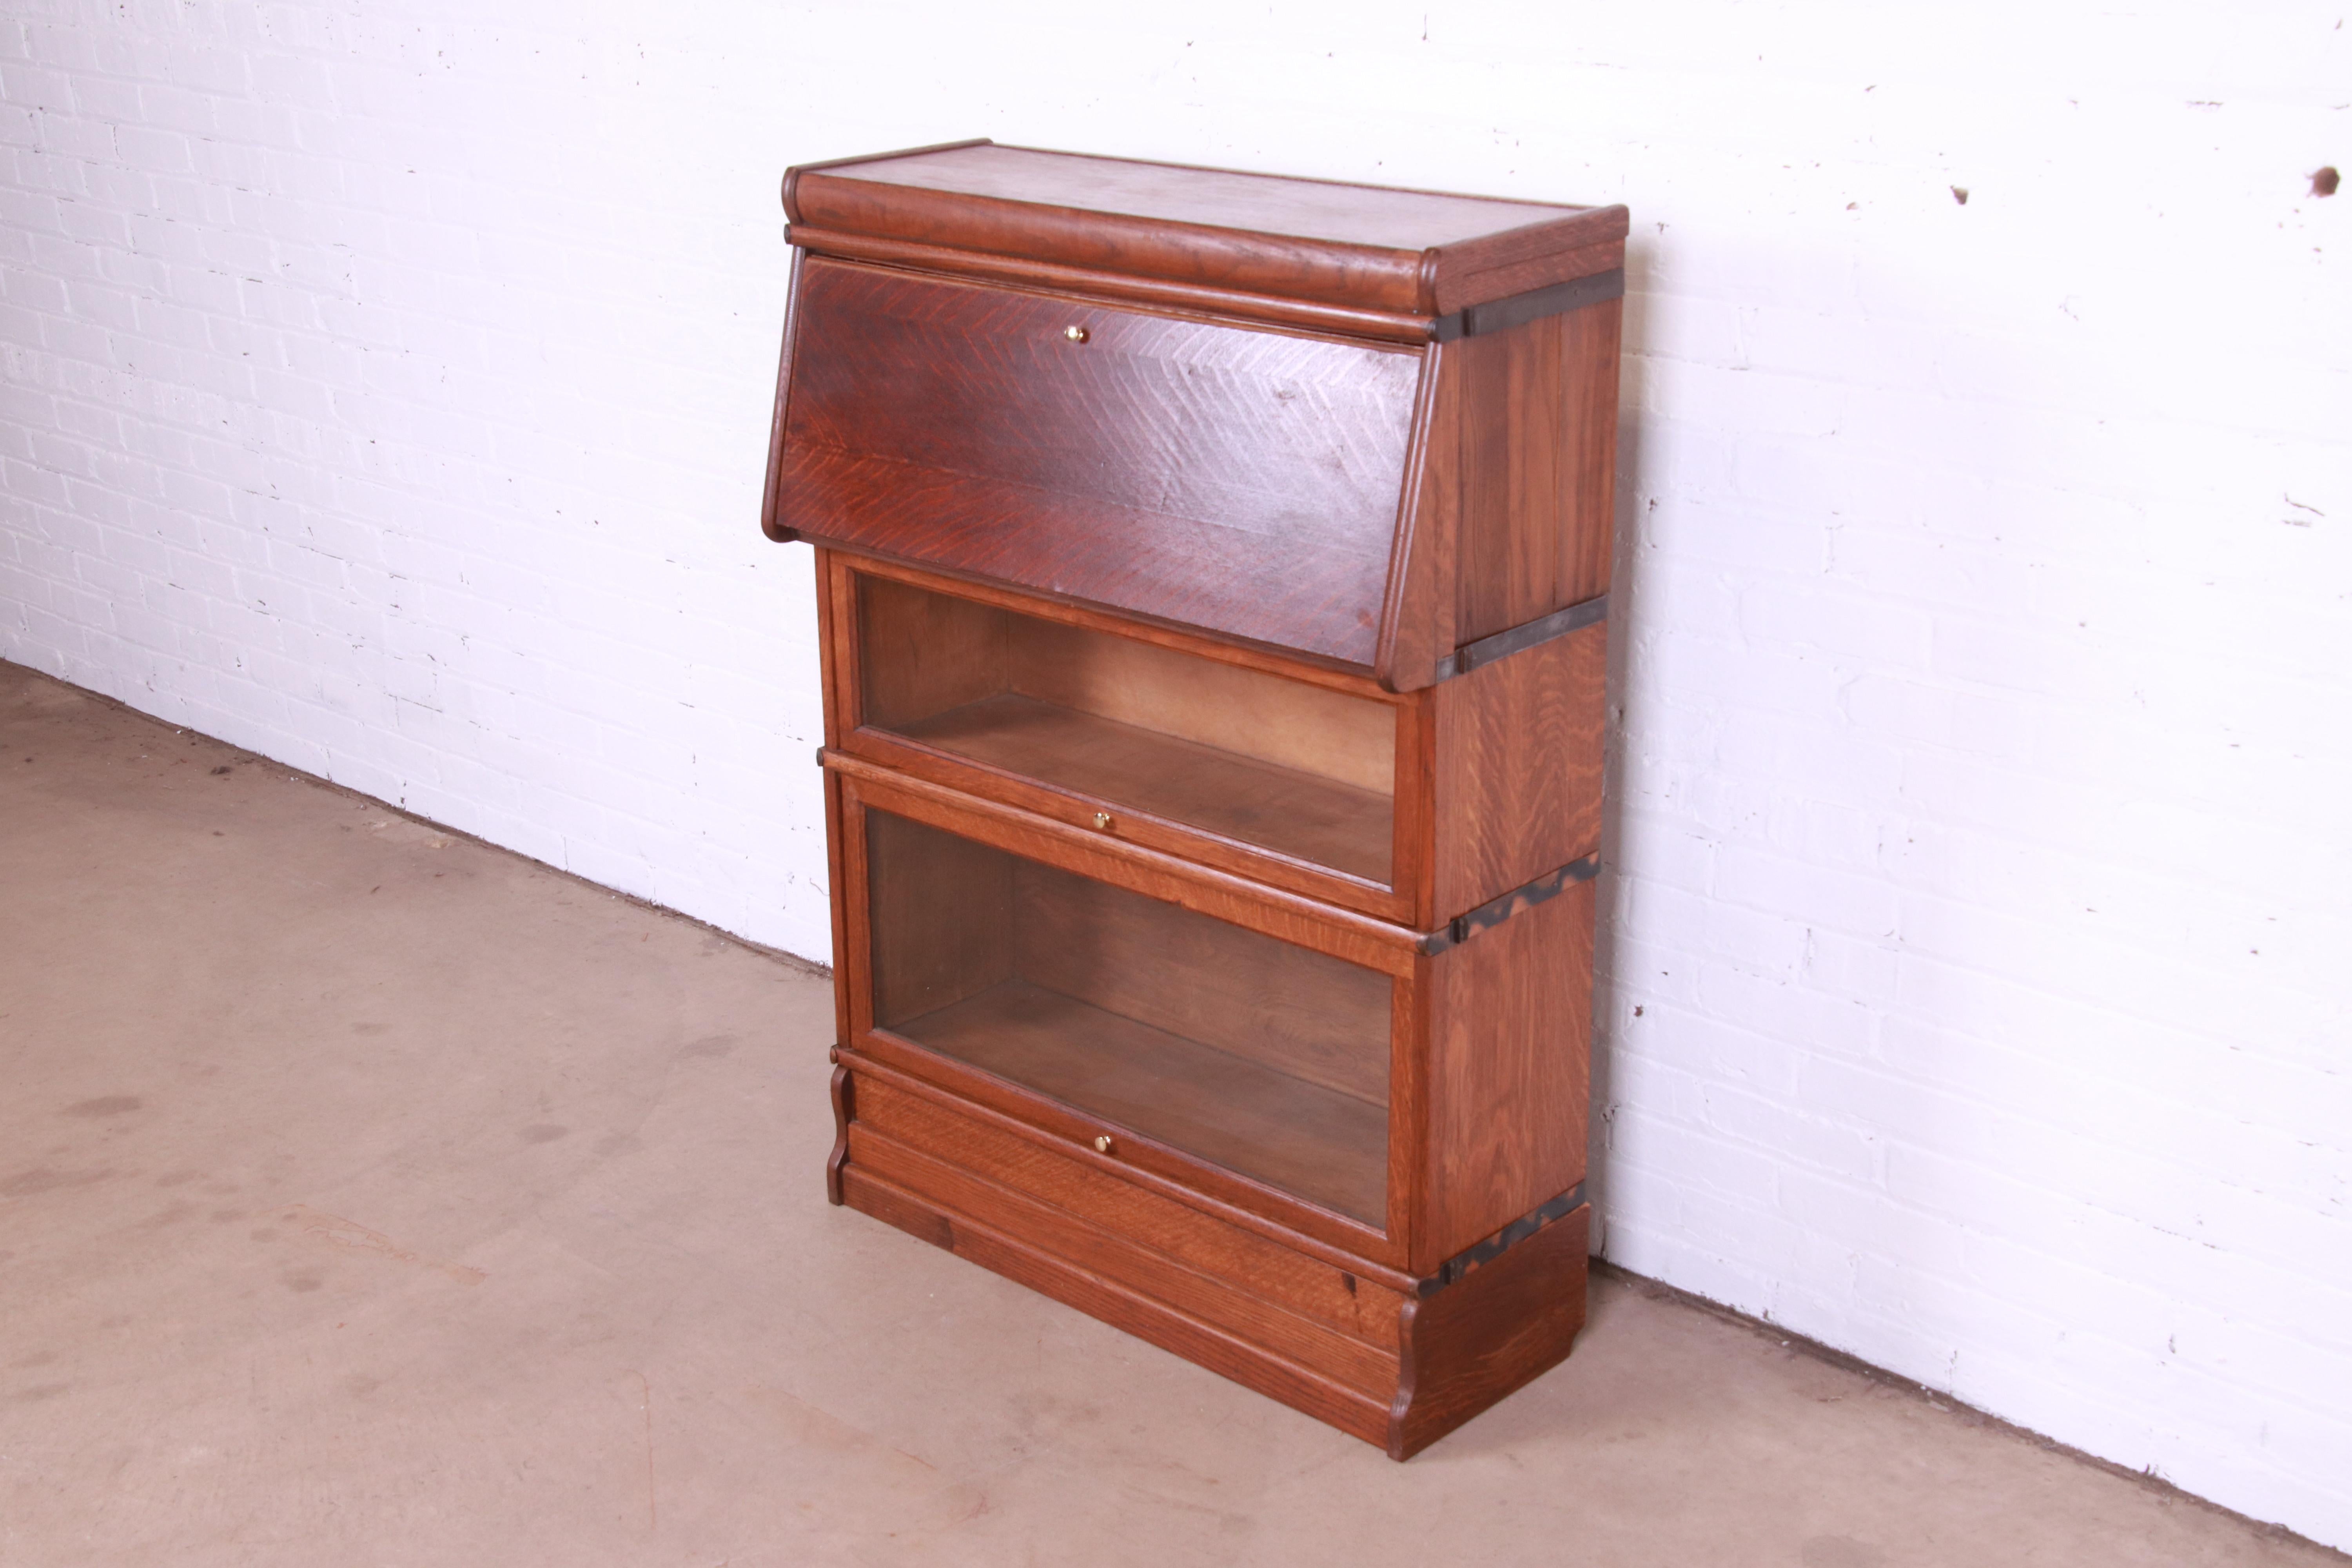 Arts and Crafts Arts & Crafts Oak Barrister Bookcase with Drop Front Secretary Desk, circa 1920s For Sale